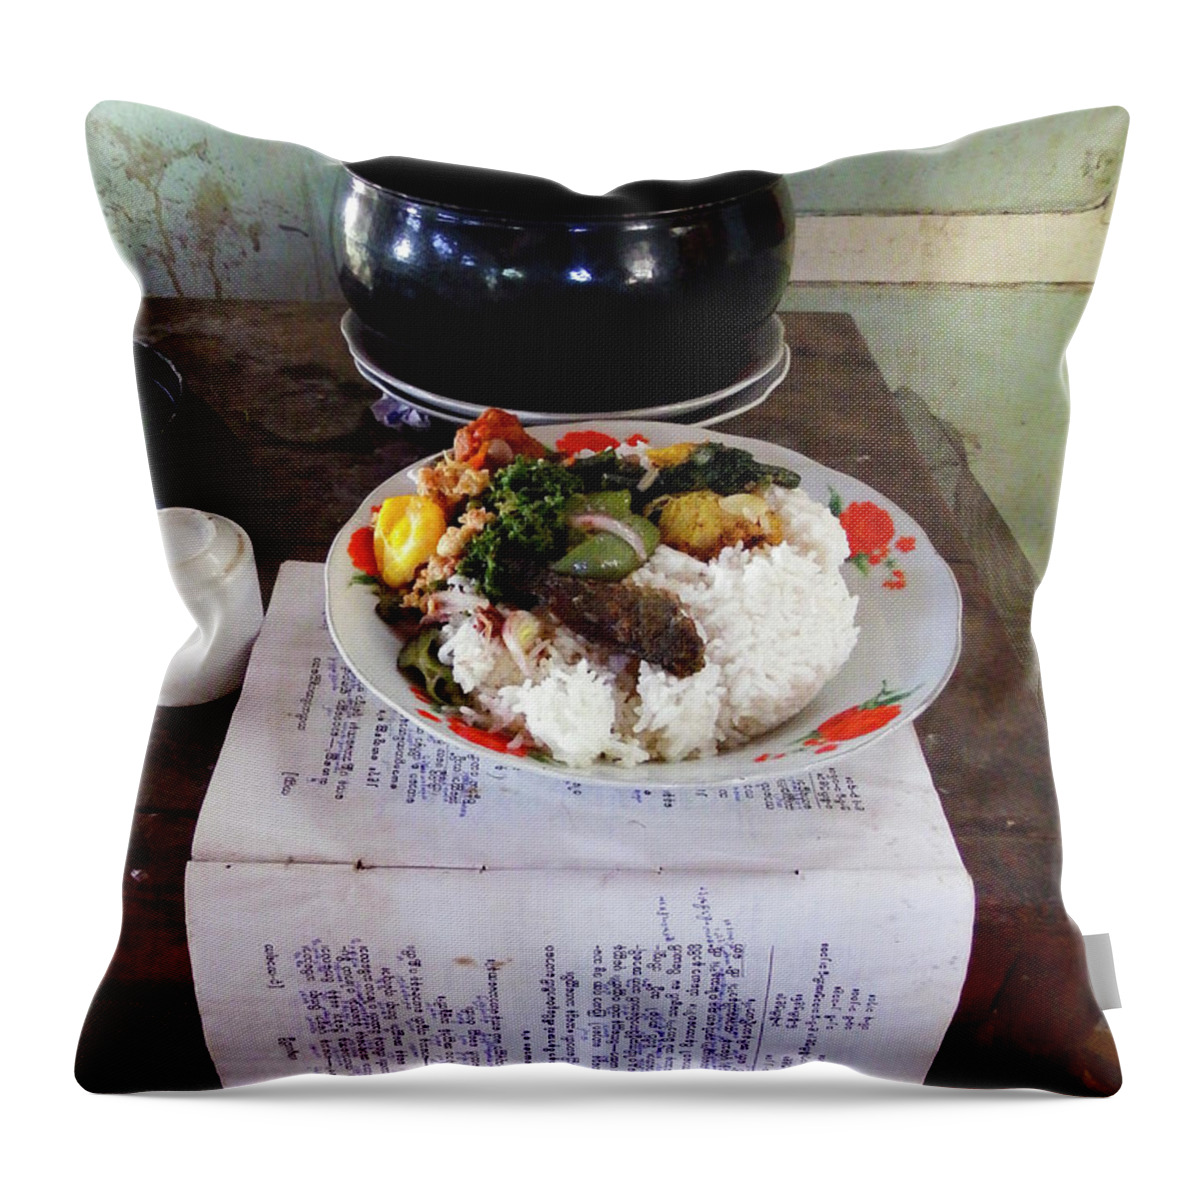 Photograph Throw Pillow featuring the photograph Buddhist Food Offering by Kurt Van Wagner